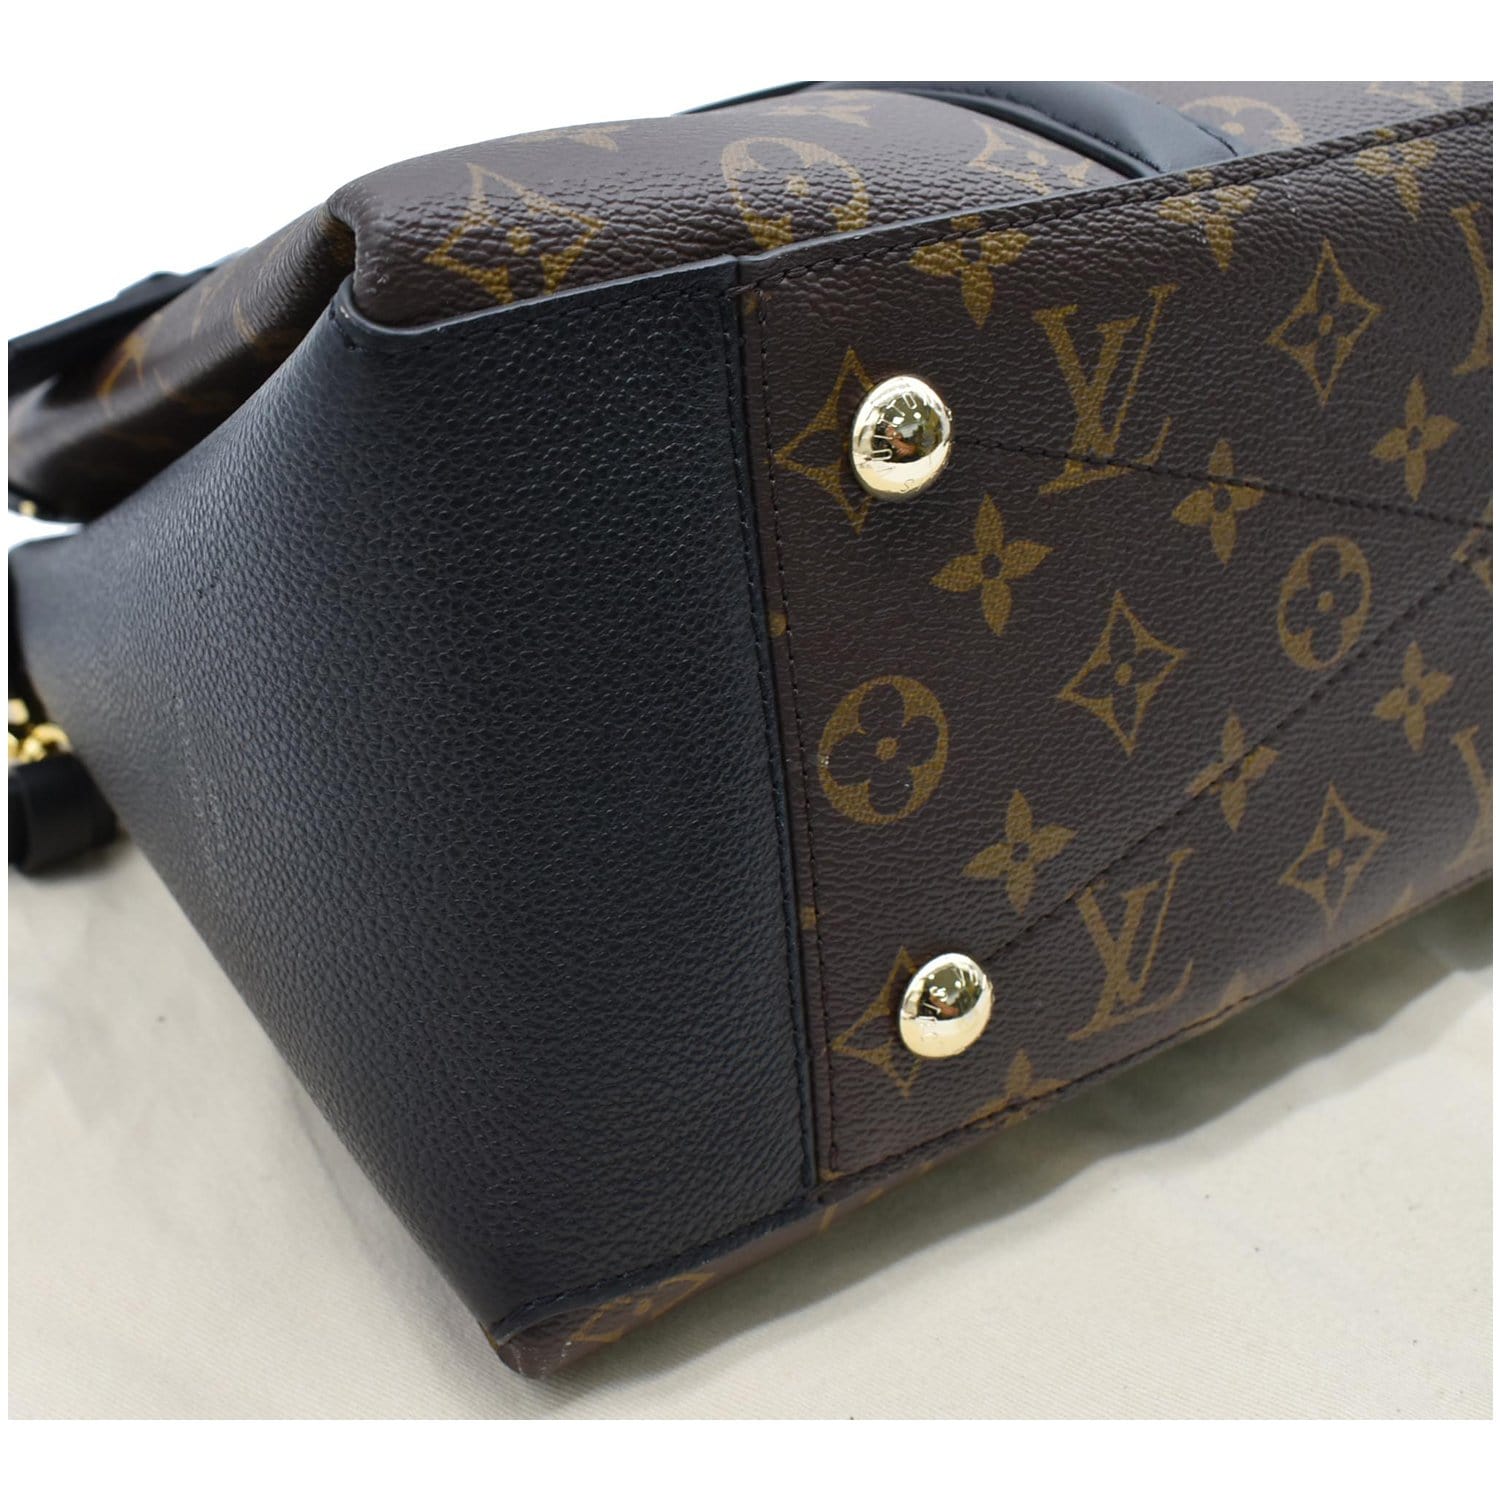 LV Soufflot MM - What fits in my bag? 